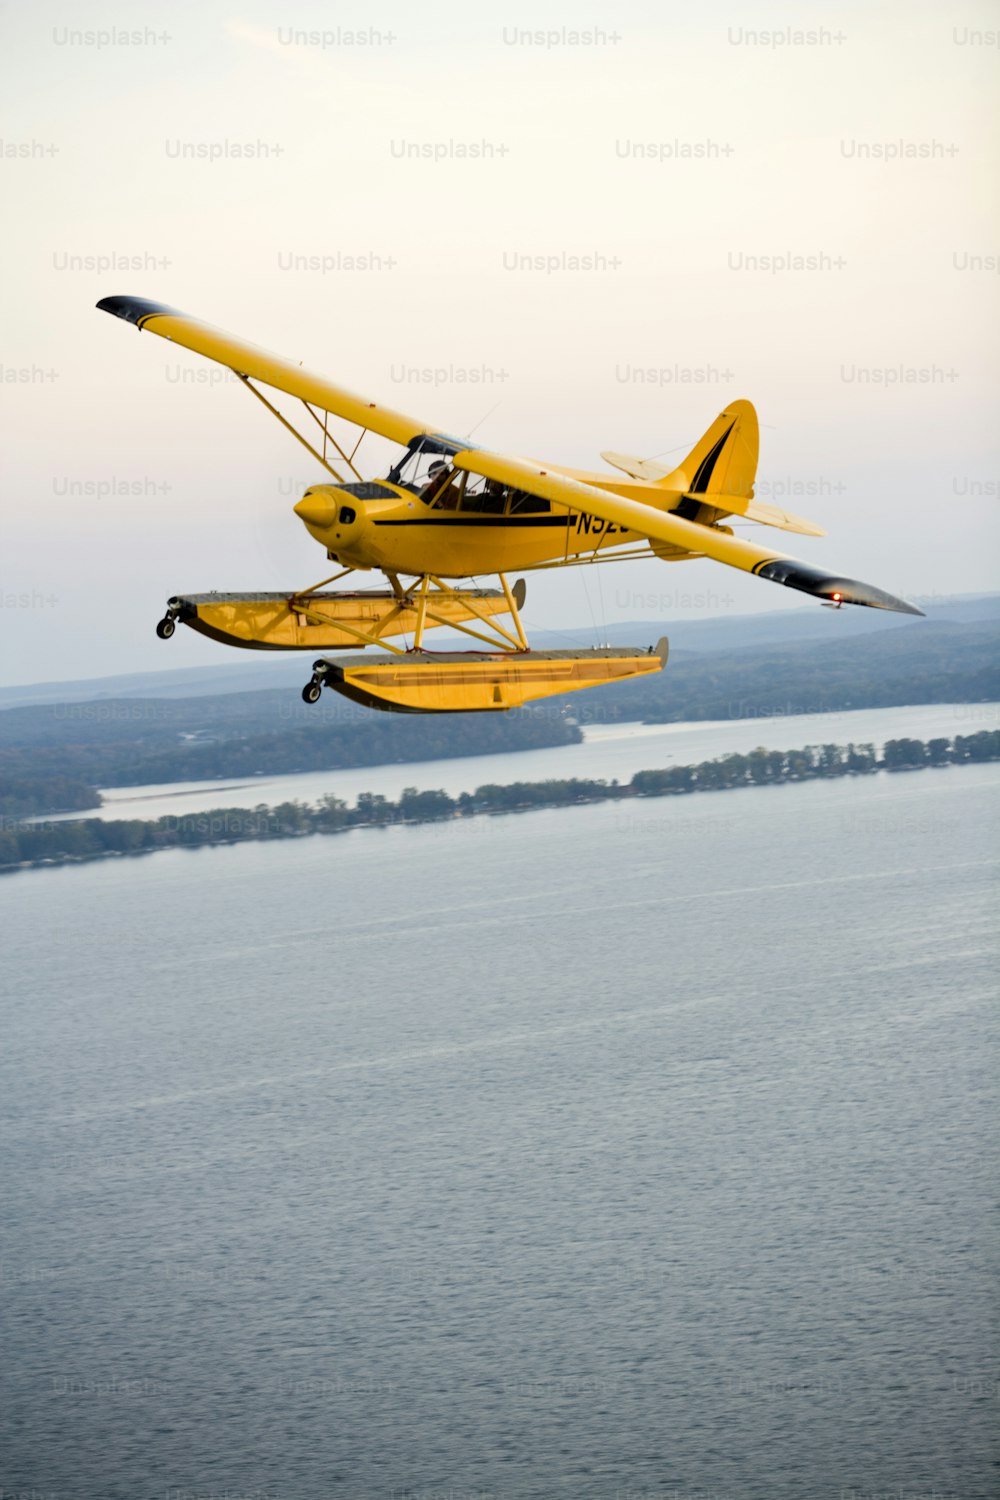 a yellow plane flying over a large body of water